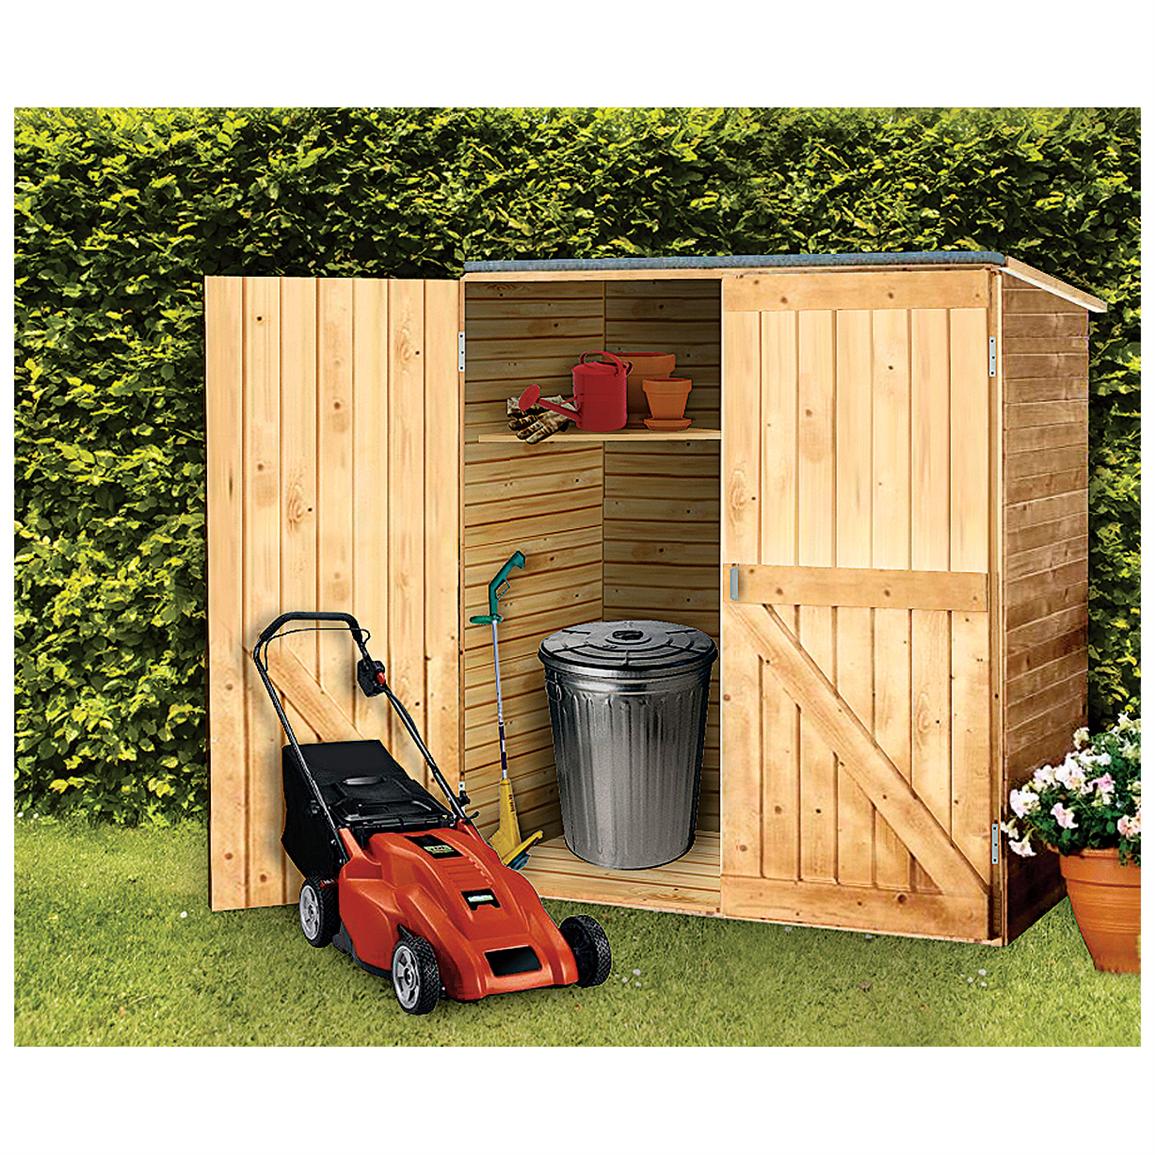 Solid Wood Outdoor Storage Shed - 236390, Patio Storage at Sportsman's